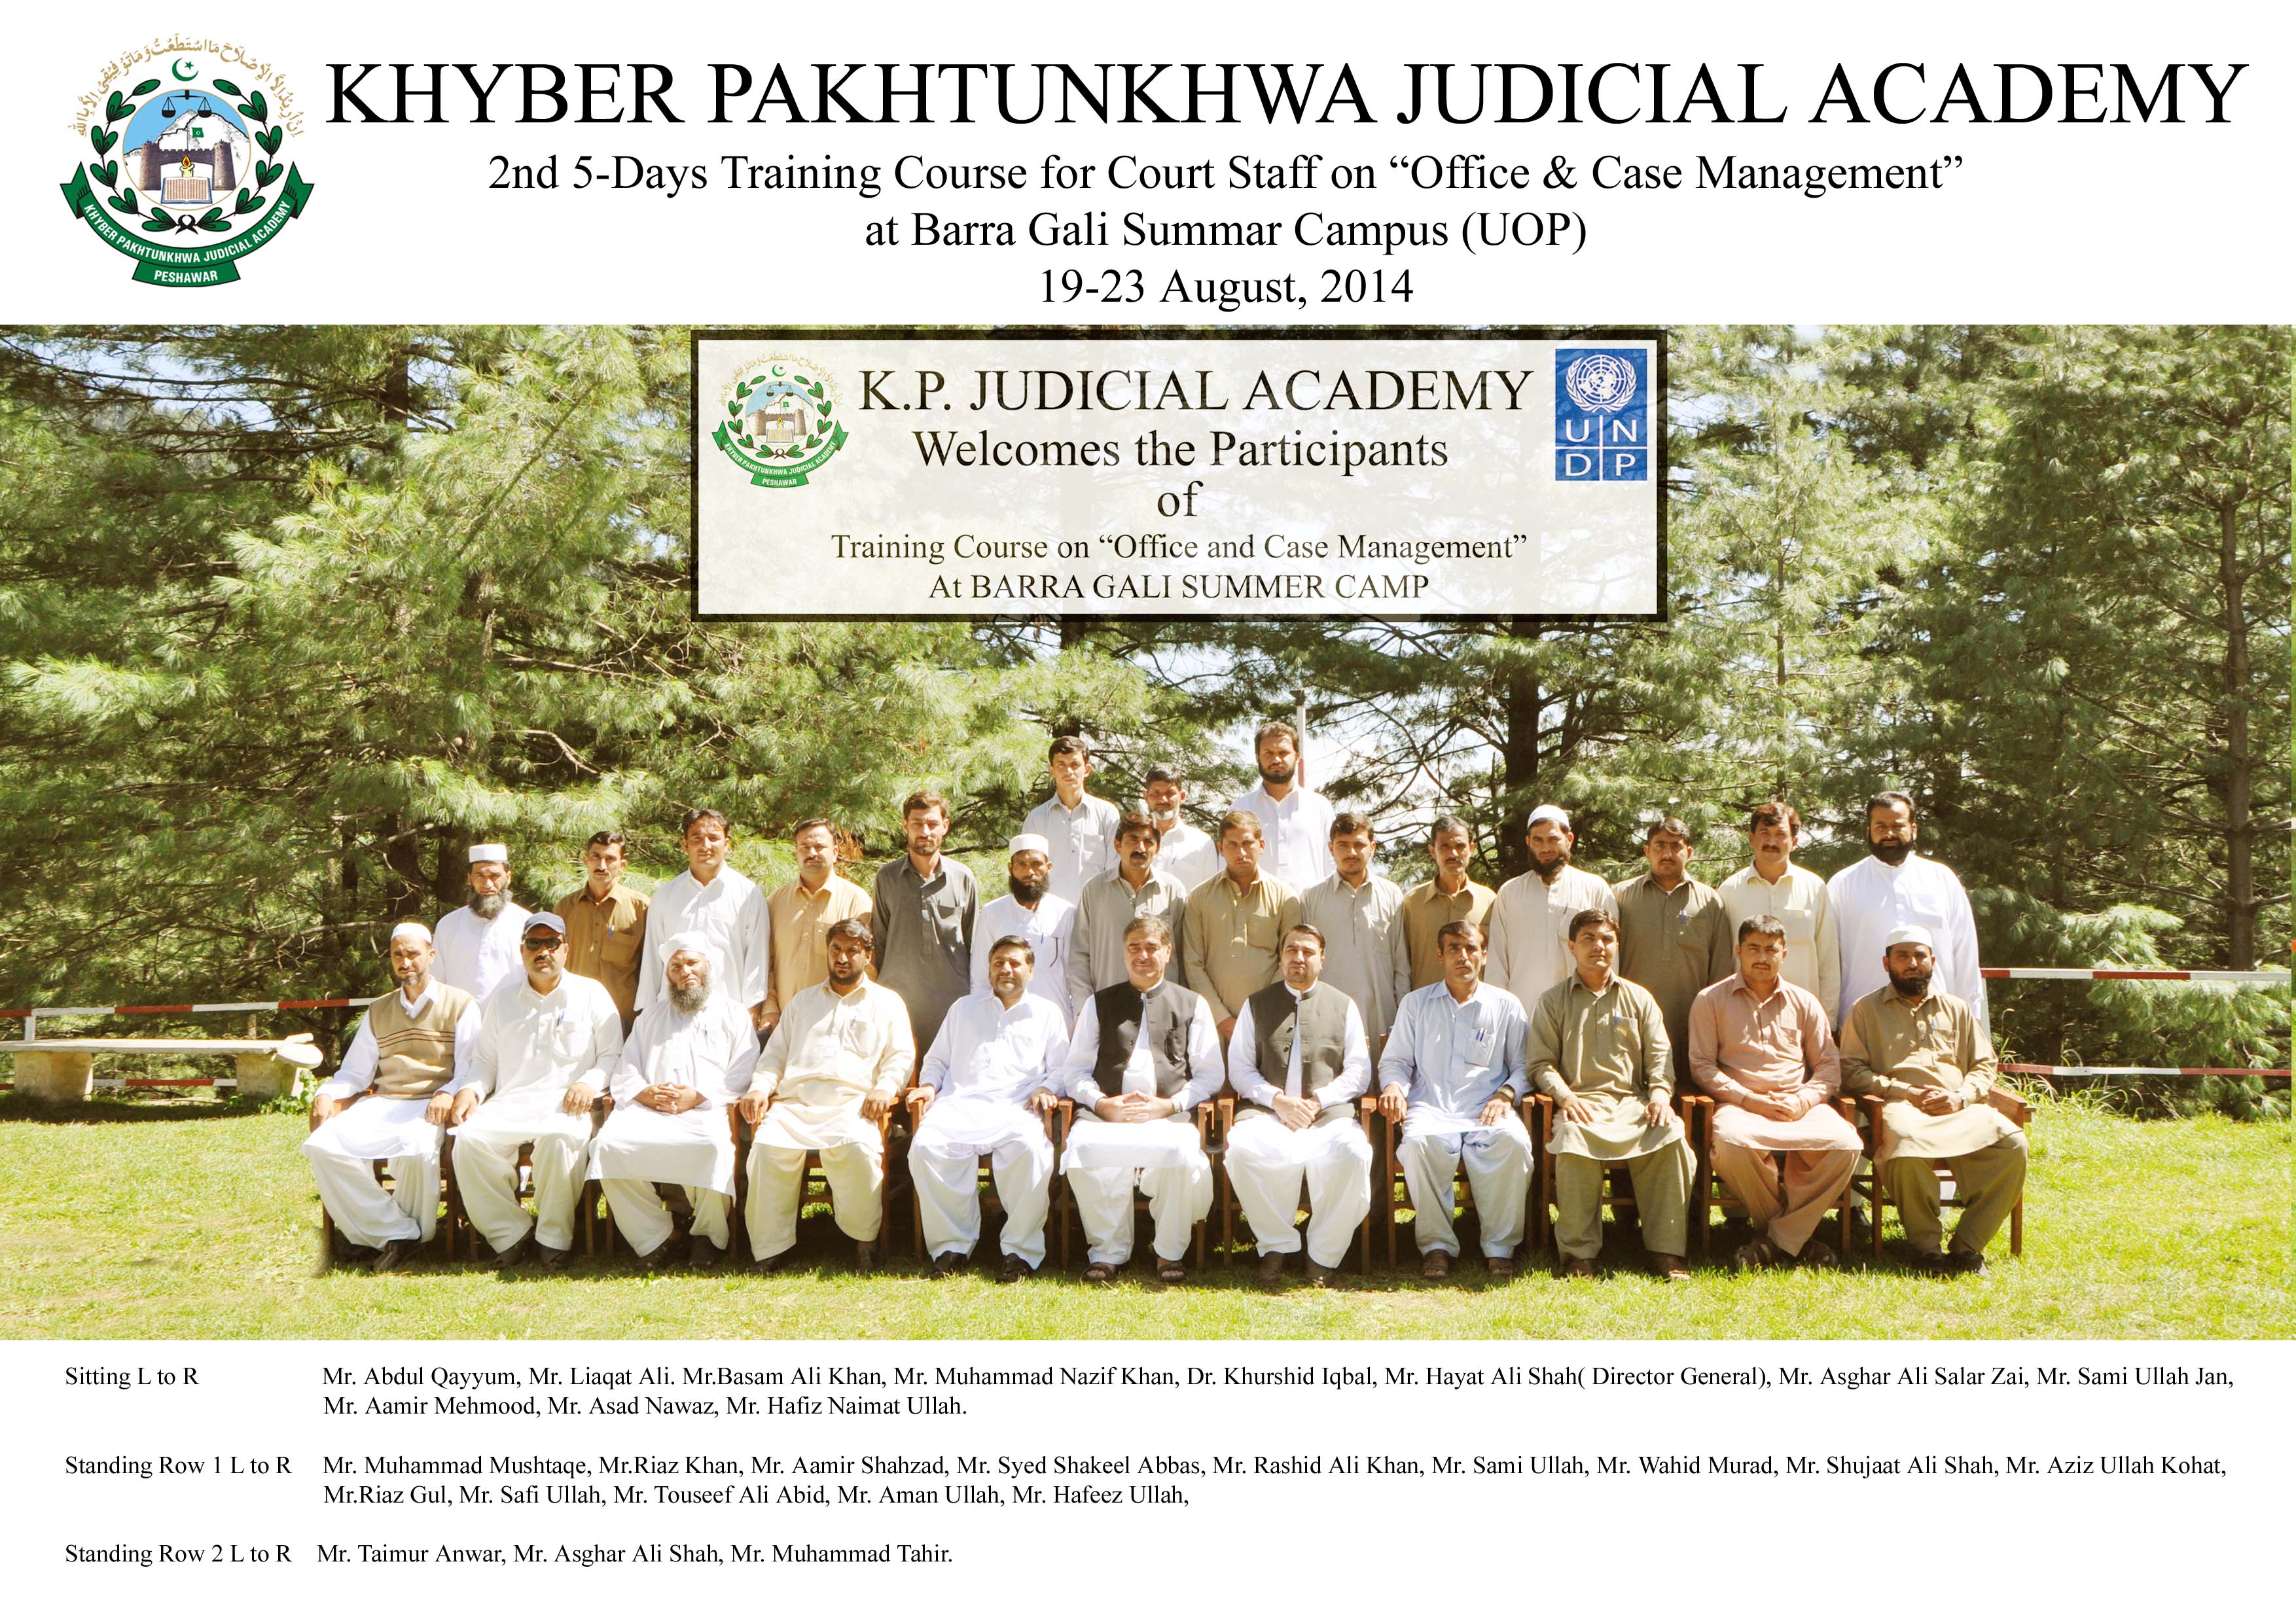 Second Training on Office Case Management for court staff concluded at Bara Gali | Khyber Pakhtunkhwa Judicial Academy, Peshawar, Pakistan